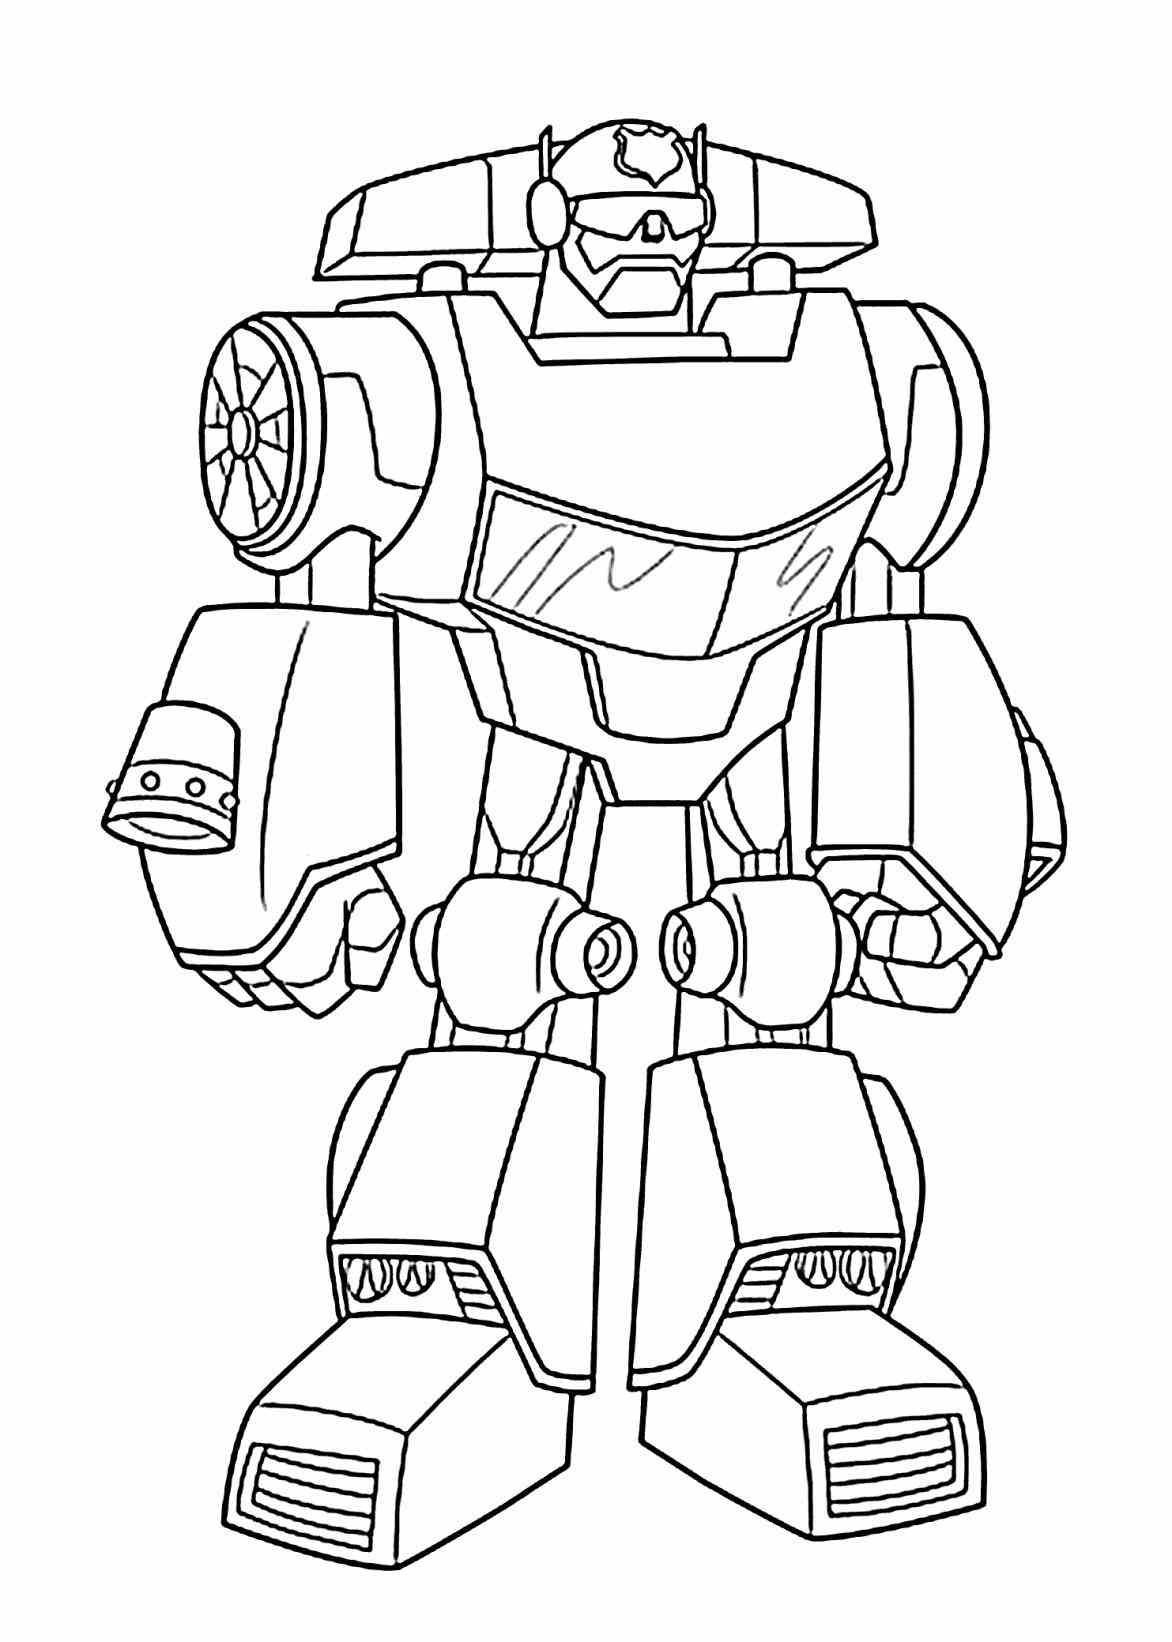 coloring : Bumblebee Coloring Pages Transformers Bumblebee Coloring Pages  Pdf‚ Bumblebee Coloring Pages Images‚ Transformers Bumblebee Coloring Pages  To Print and colorings